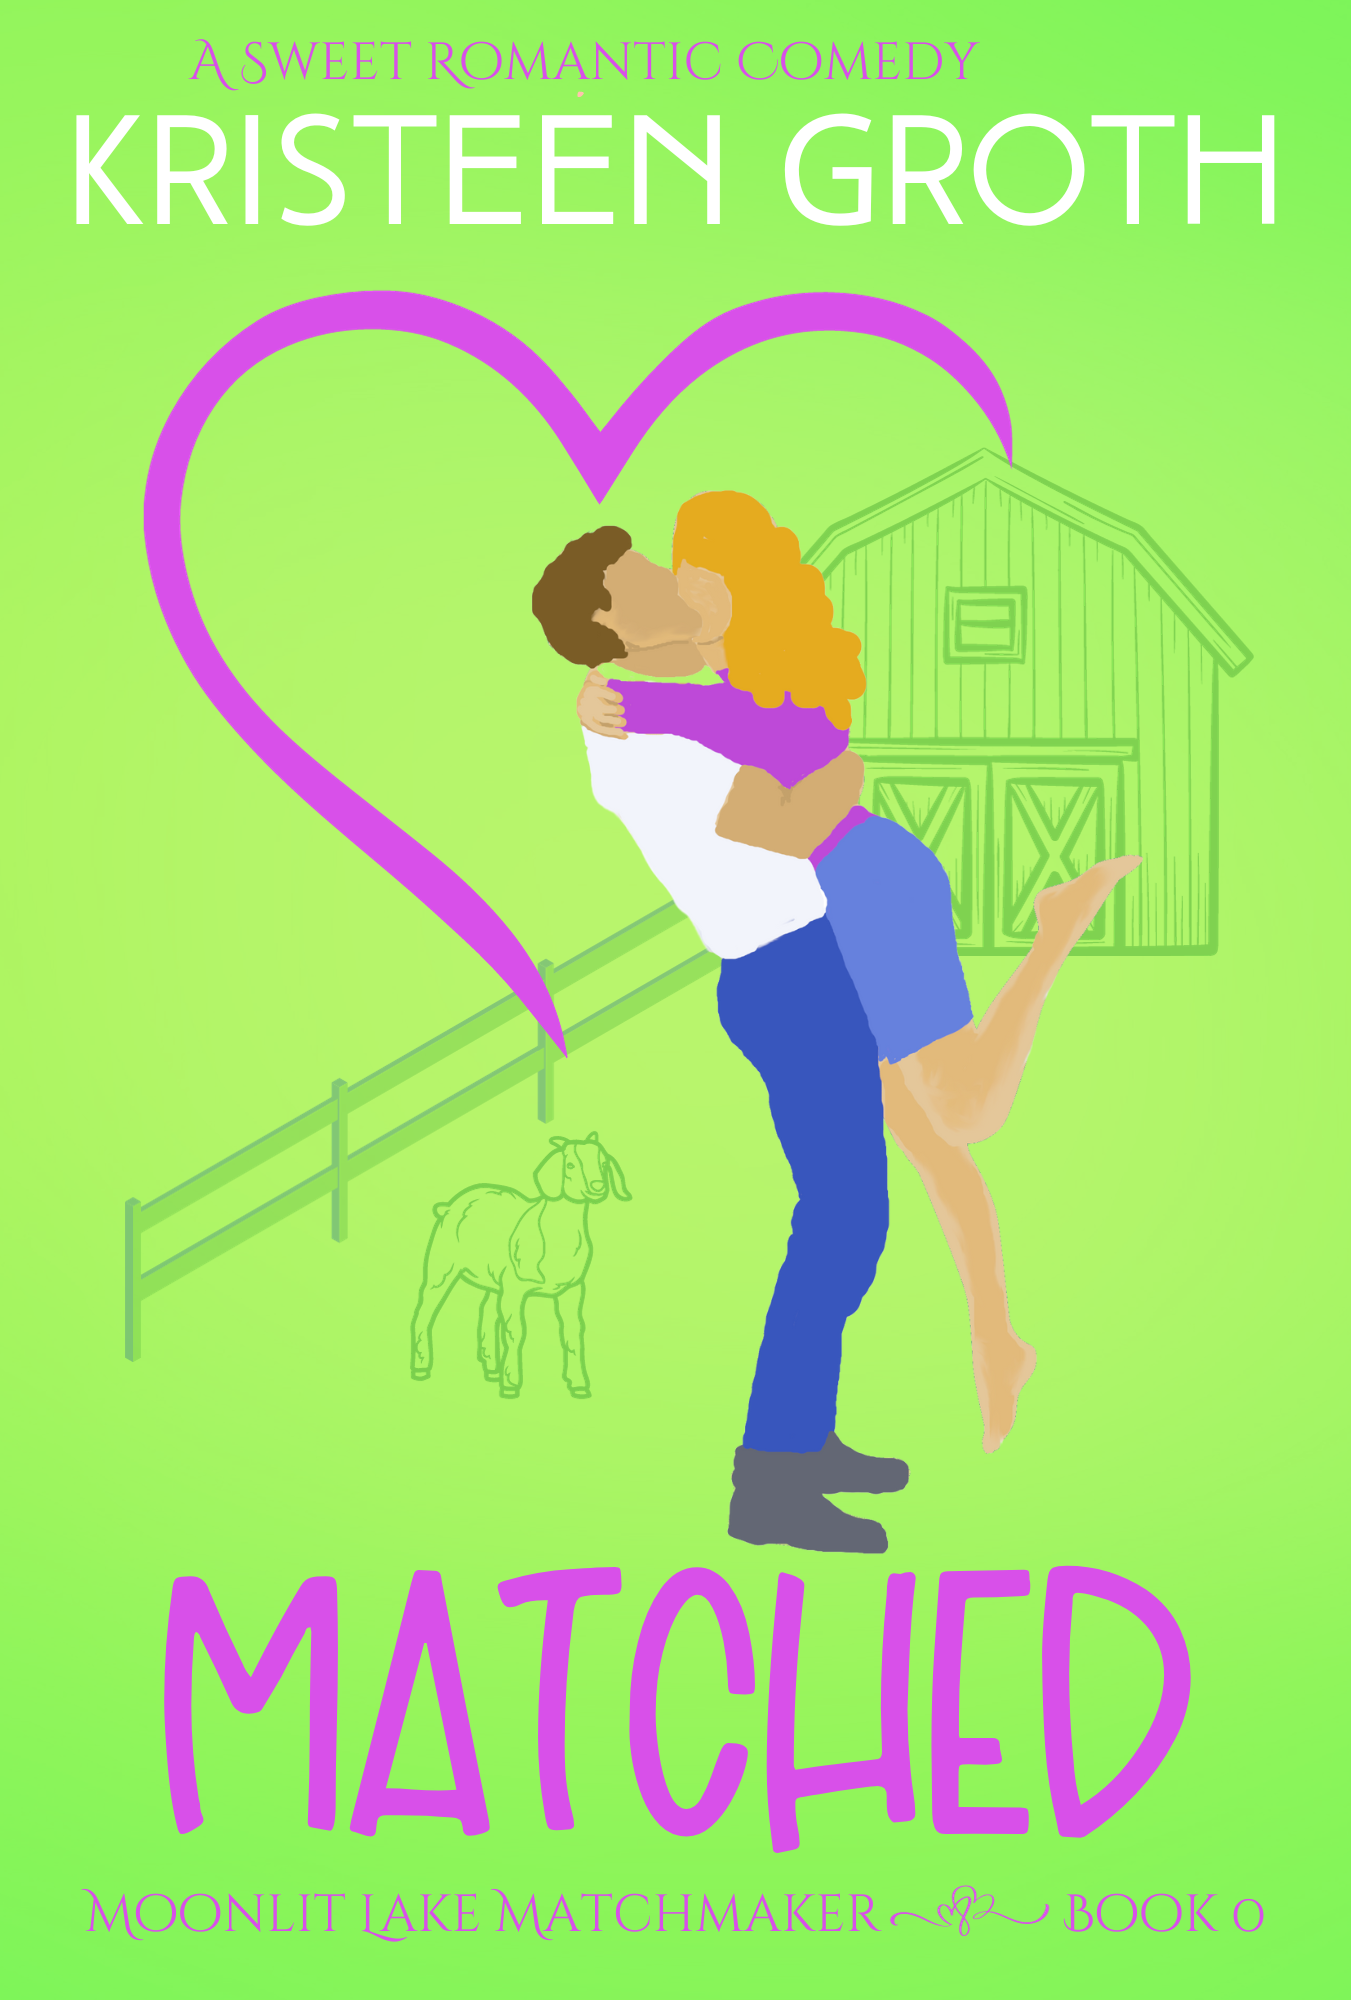 sweet romcom Matched by kristeen groth